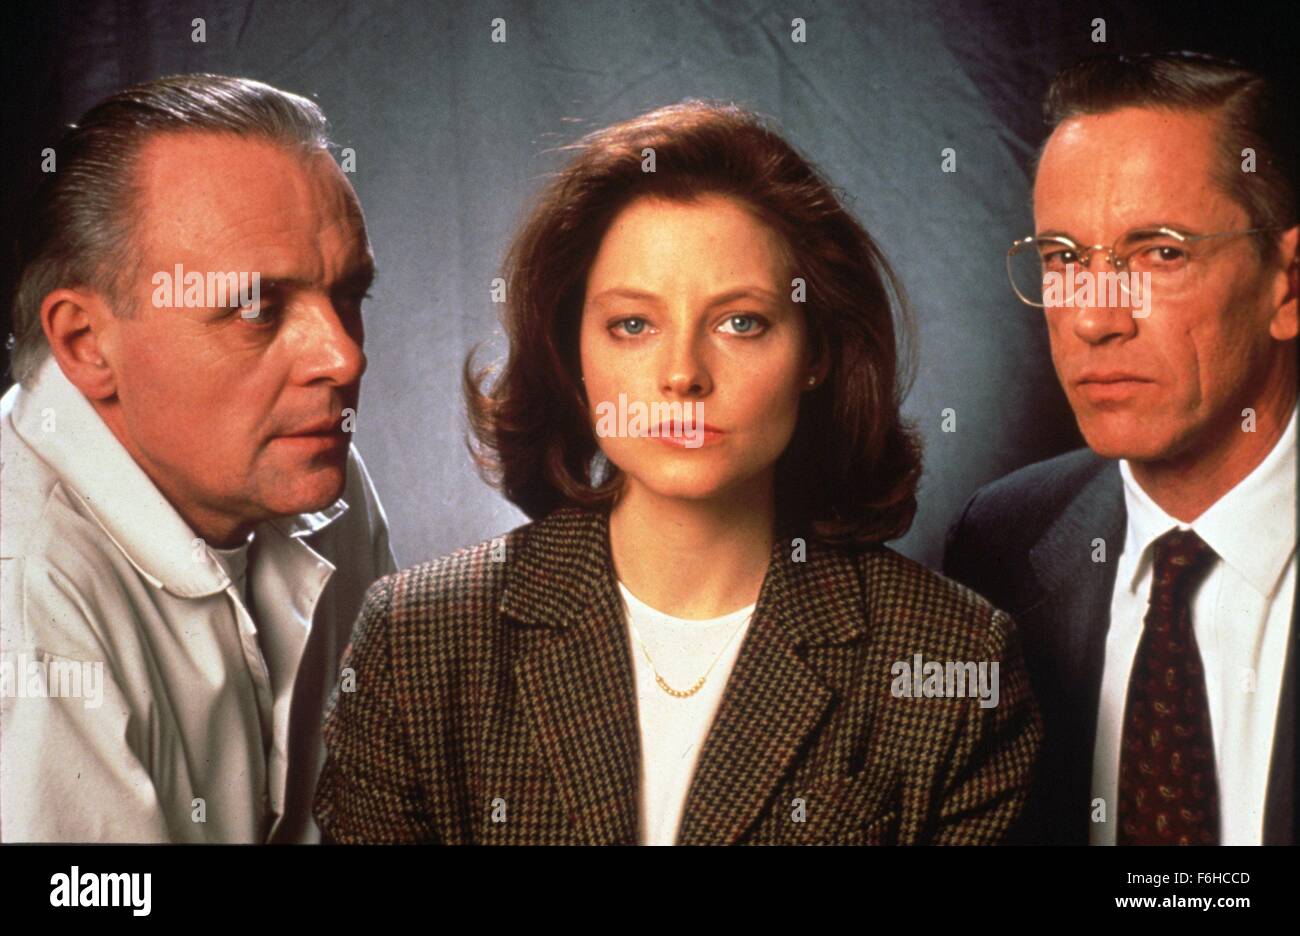 1991, Film Title: SILENCE OF THE LAMBS, Director: JONATHAN DEMME, Studio: ORION, Pictured: JONATHAN DEMME, JODIE FOSTER, SCOTT GLENN. (Credit Image: SNAP) Stock Photo